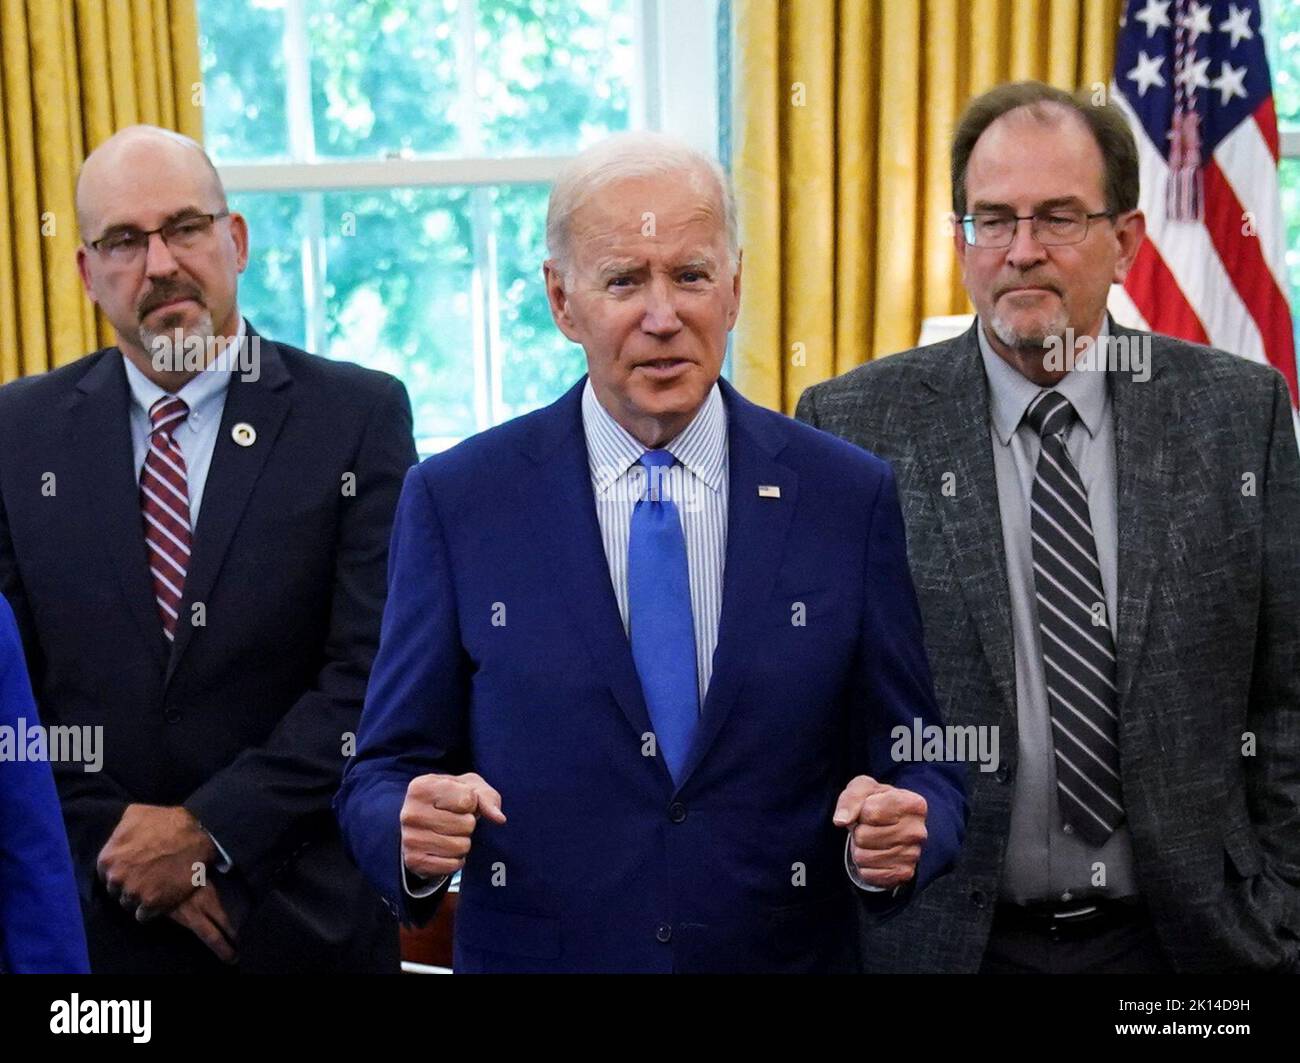 U.S. President Joe Biden pumps his fists as he greets negotiators who brokered the railway labor agreement after U.S. railroads and unions secured a tentative deal to avert a rail shutdown, in the Oval Office at the White House in Washington, U.S., September 15, 2022. REUTERS/Kevin Lamarque Stock Photo